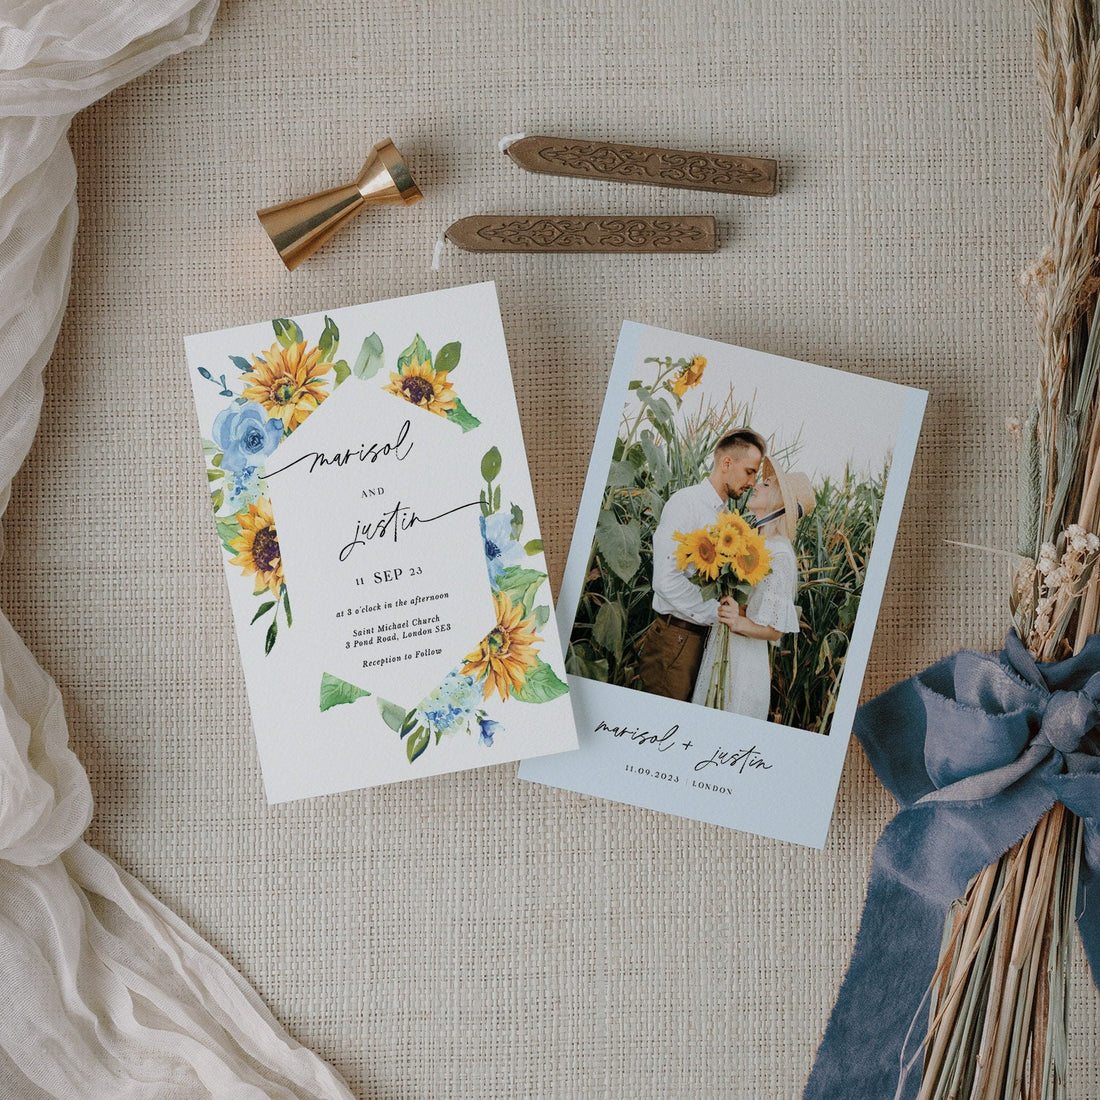 IVY Wedding Invitation Template Sunflowers and Dusty Blue Roses